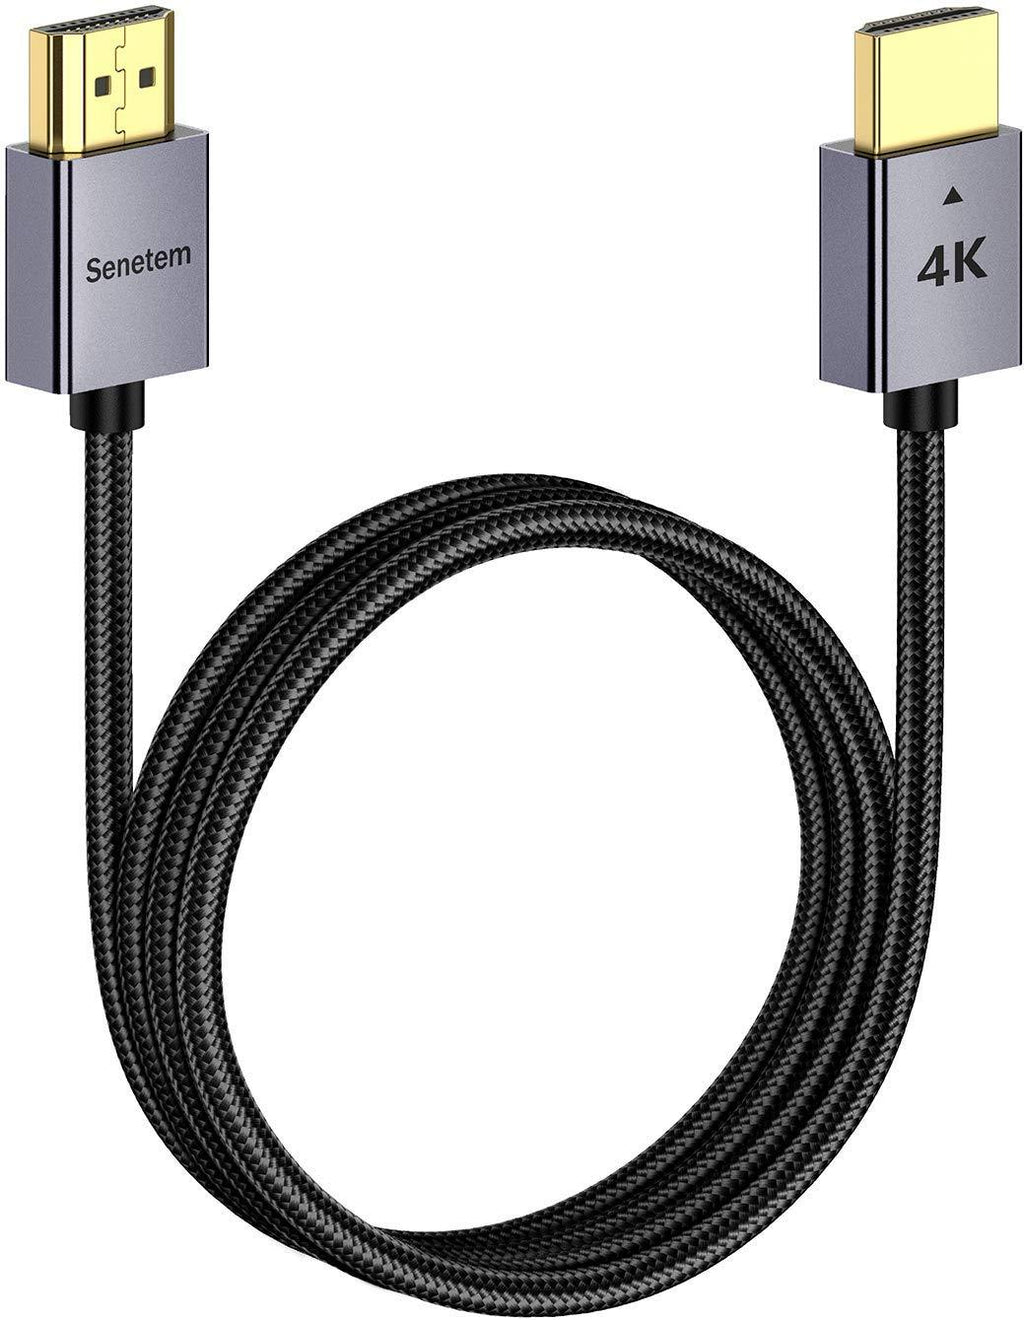 4K HDMI Cable 1.6 ft High Speed (4K@60Hz, 18Gbps), HDMI 2.0 Cord, Cotton Braided, Slim Aluminum Shell, Gold-Plated Connectors -4K HDR, ARC, for Gaming Monitor, TV, X-Box, PS5/4/3 (1.6 Feet, Braided) 1.6 Feet